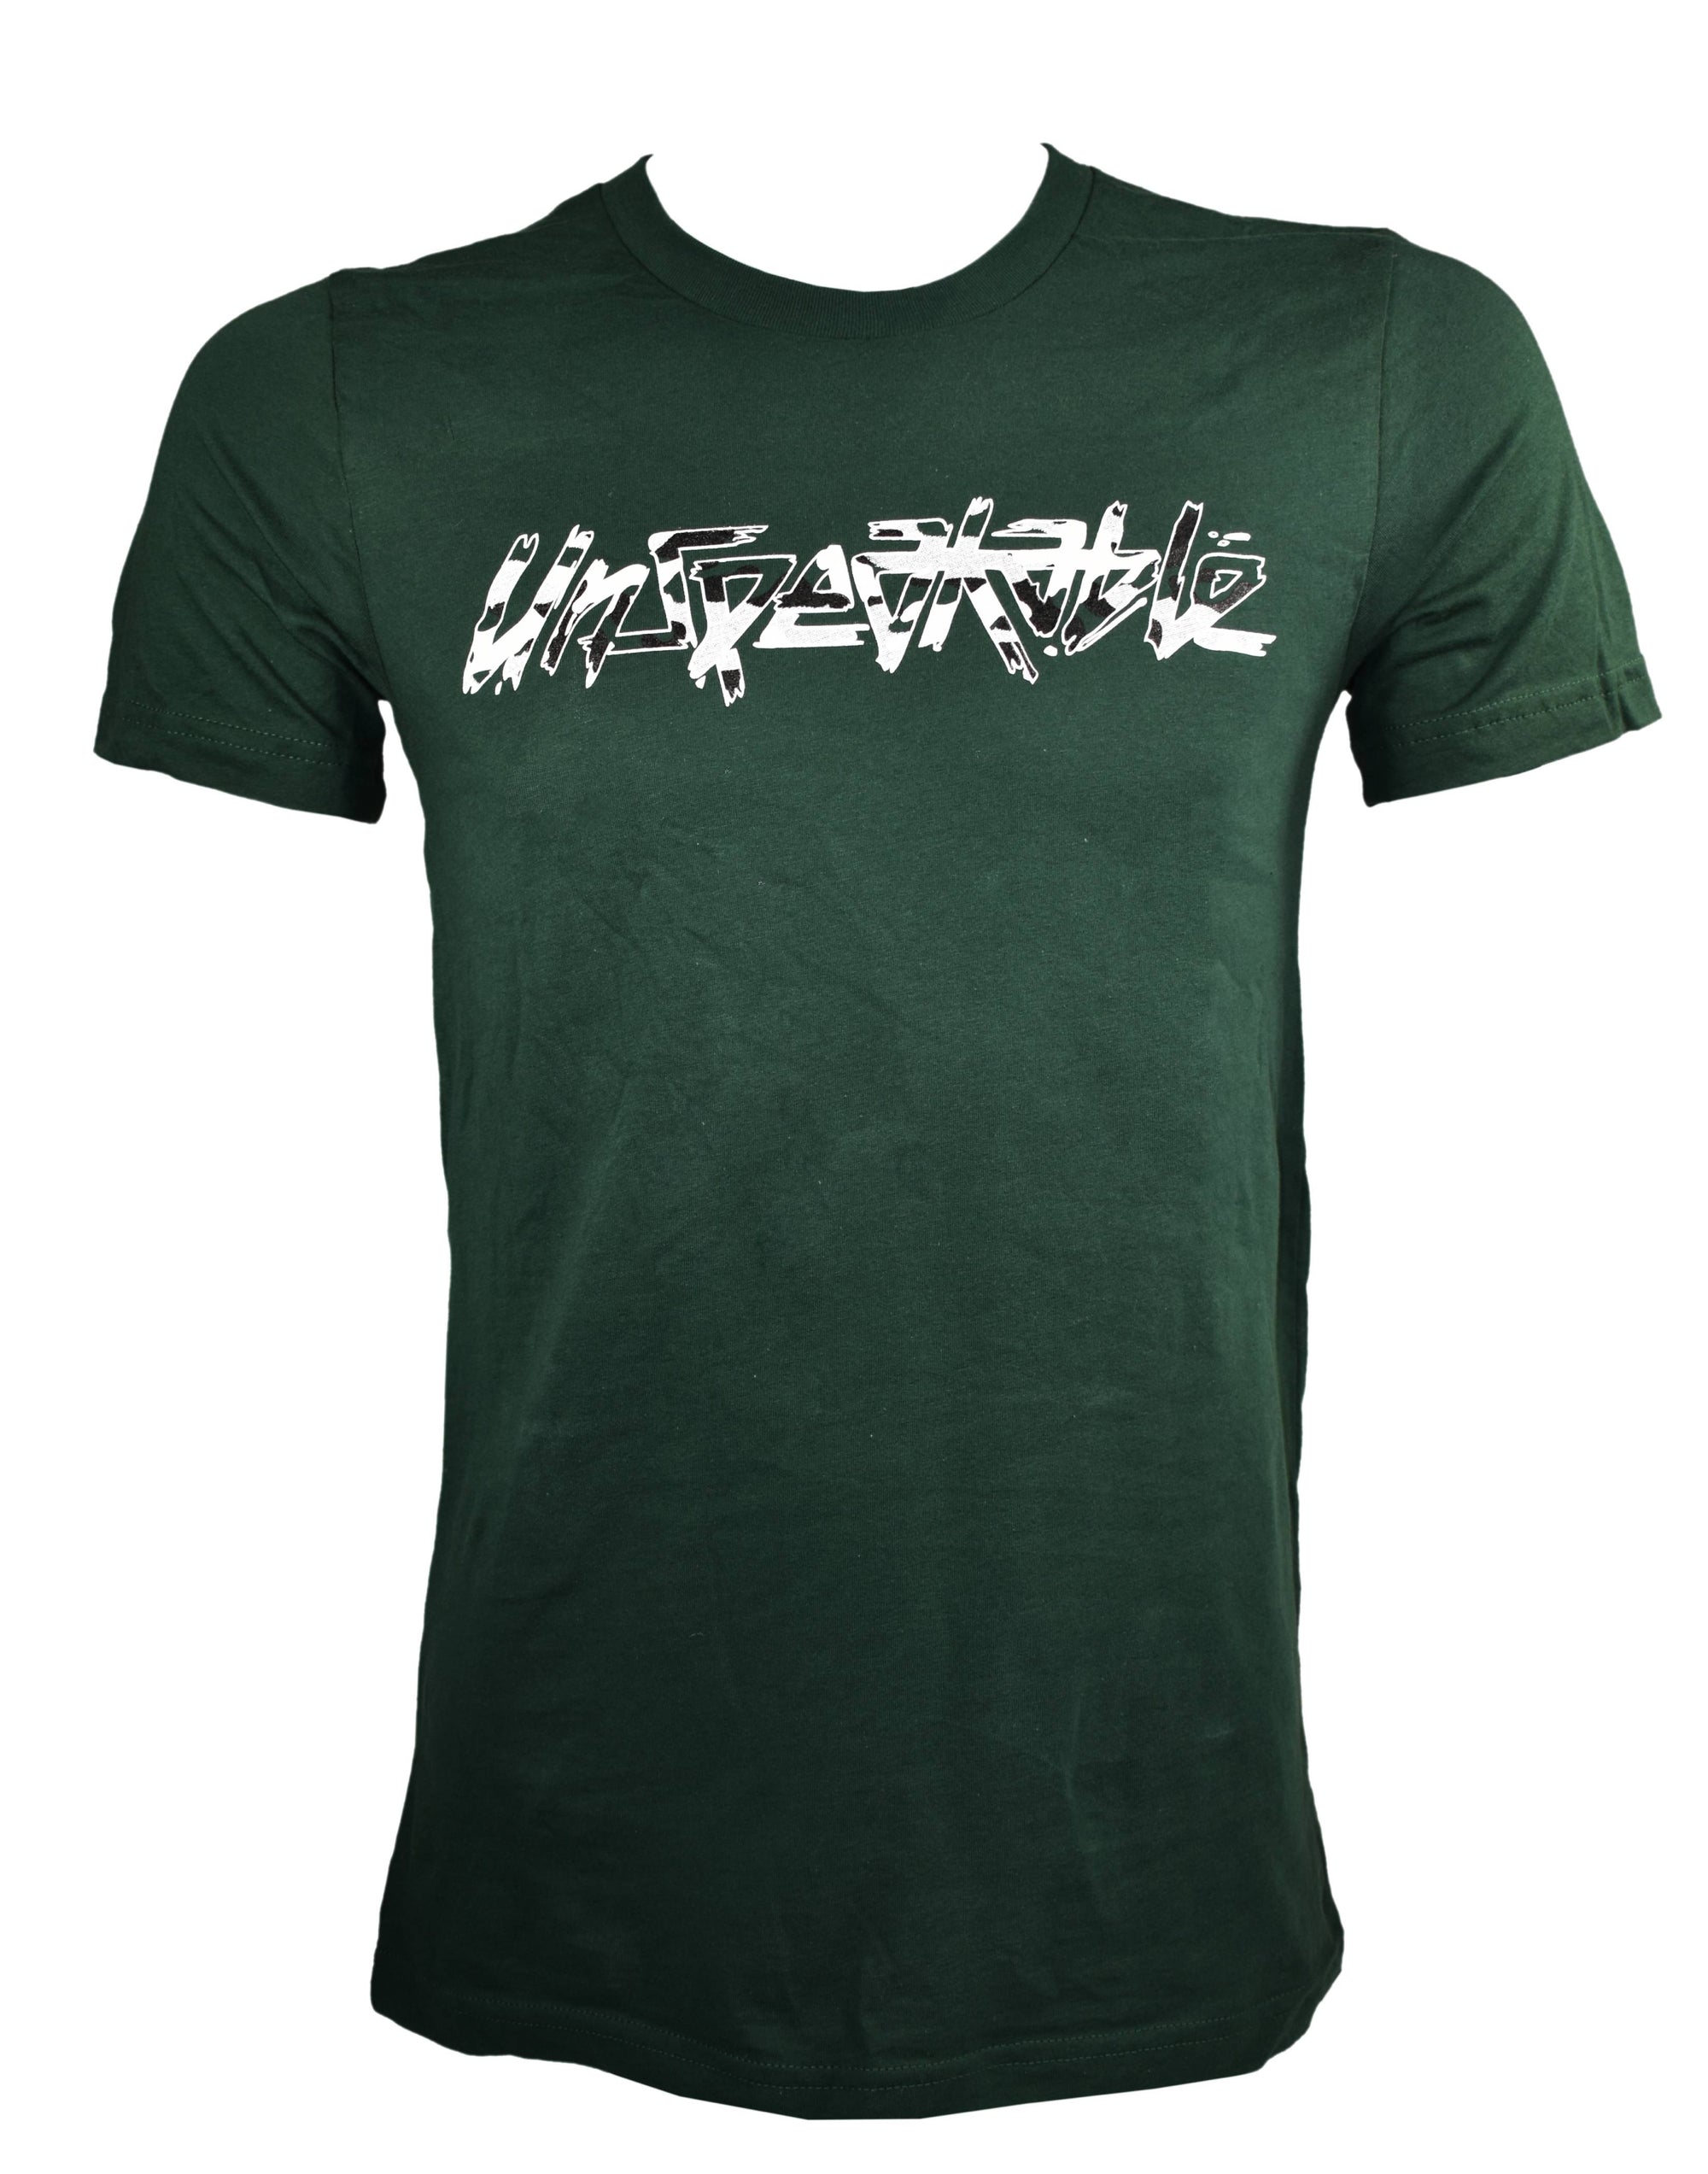 FOREST CAMO T-SHIRT - UnspeakableGaming